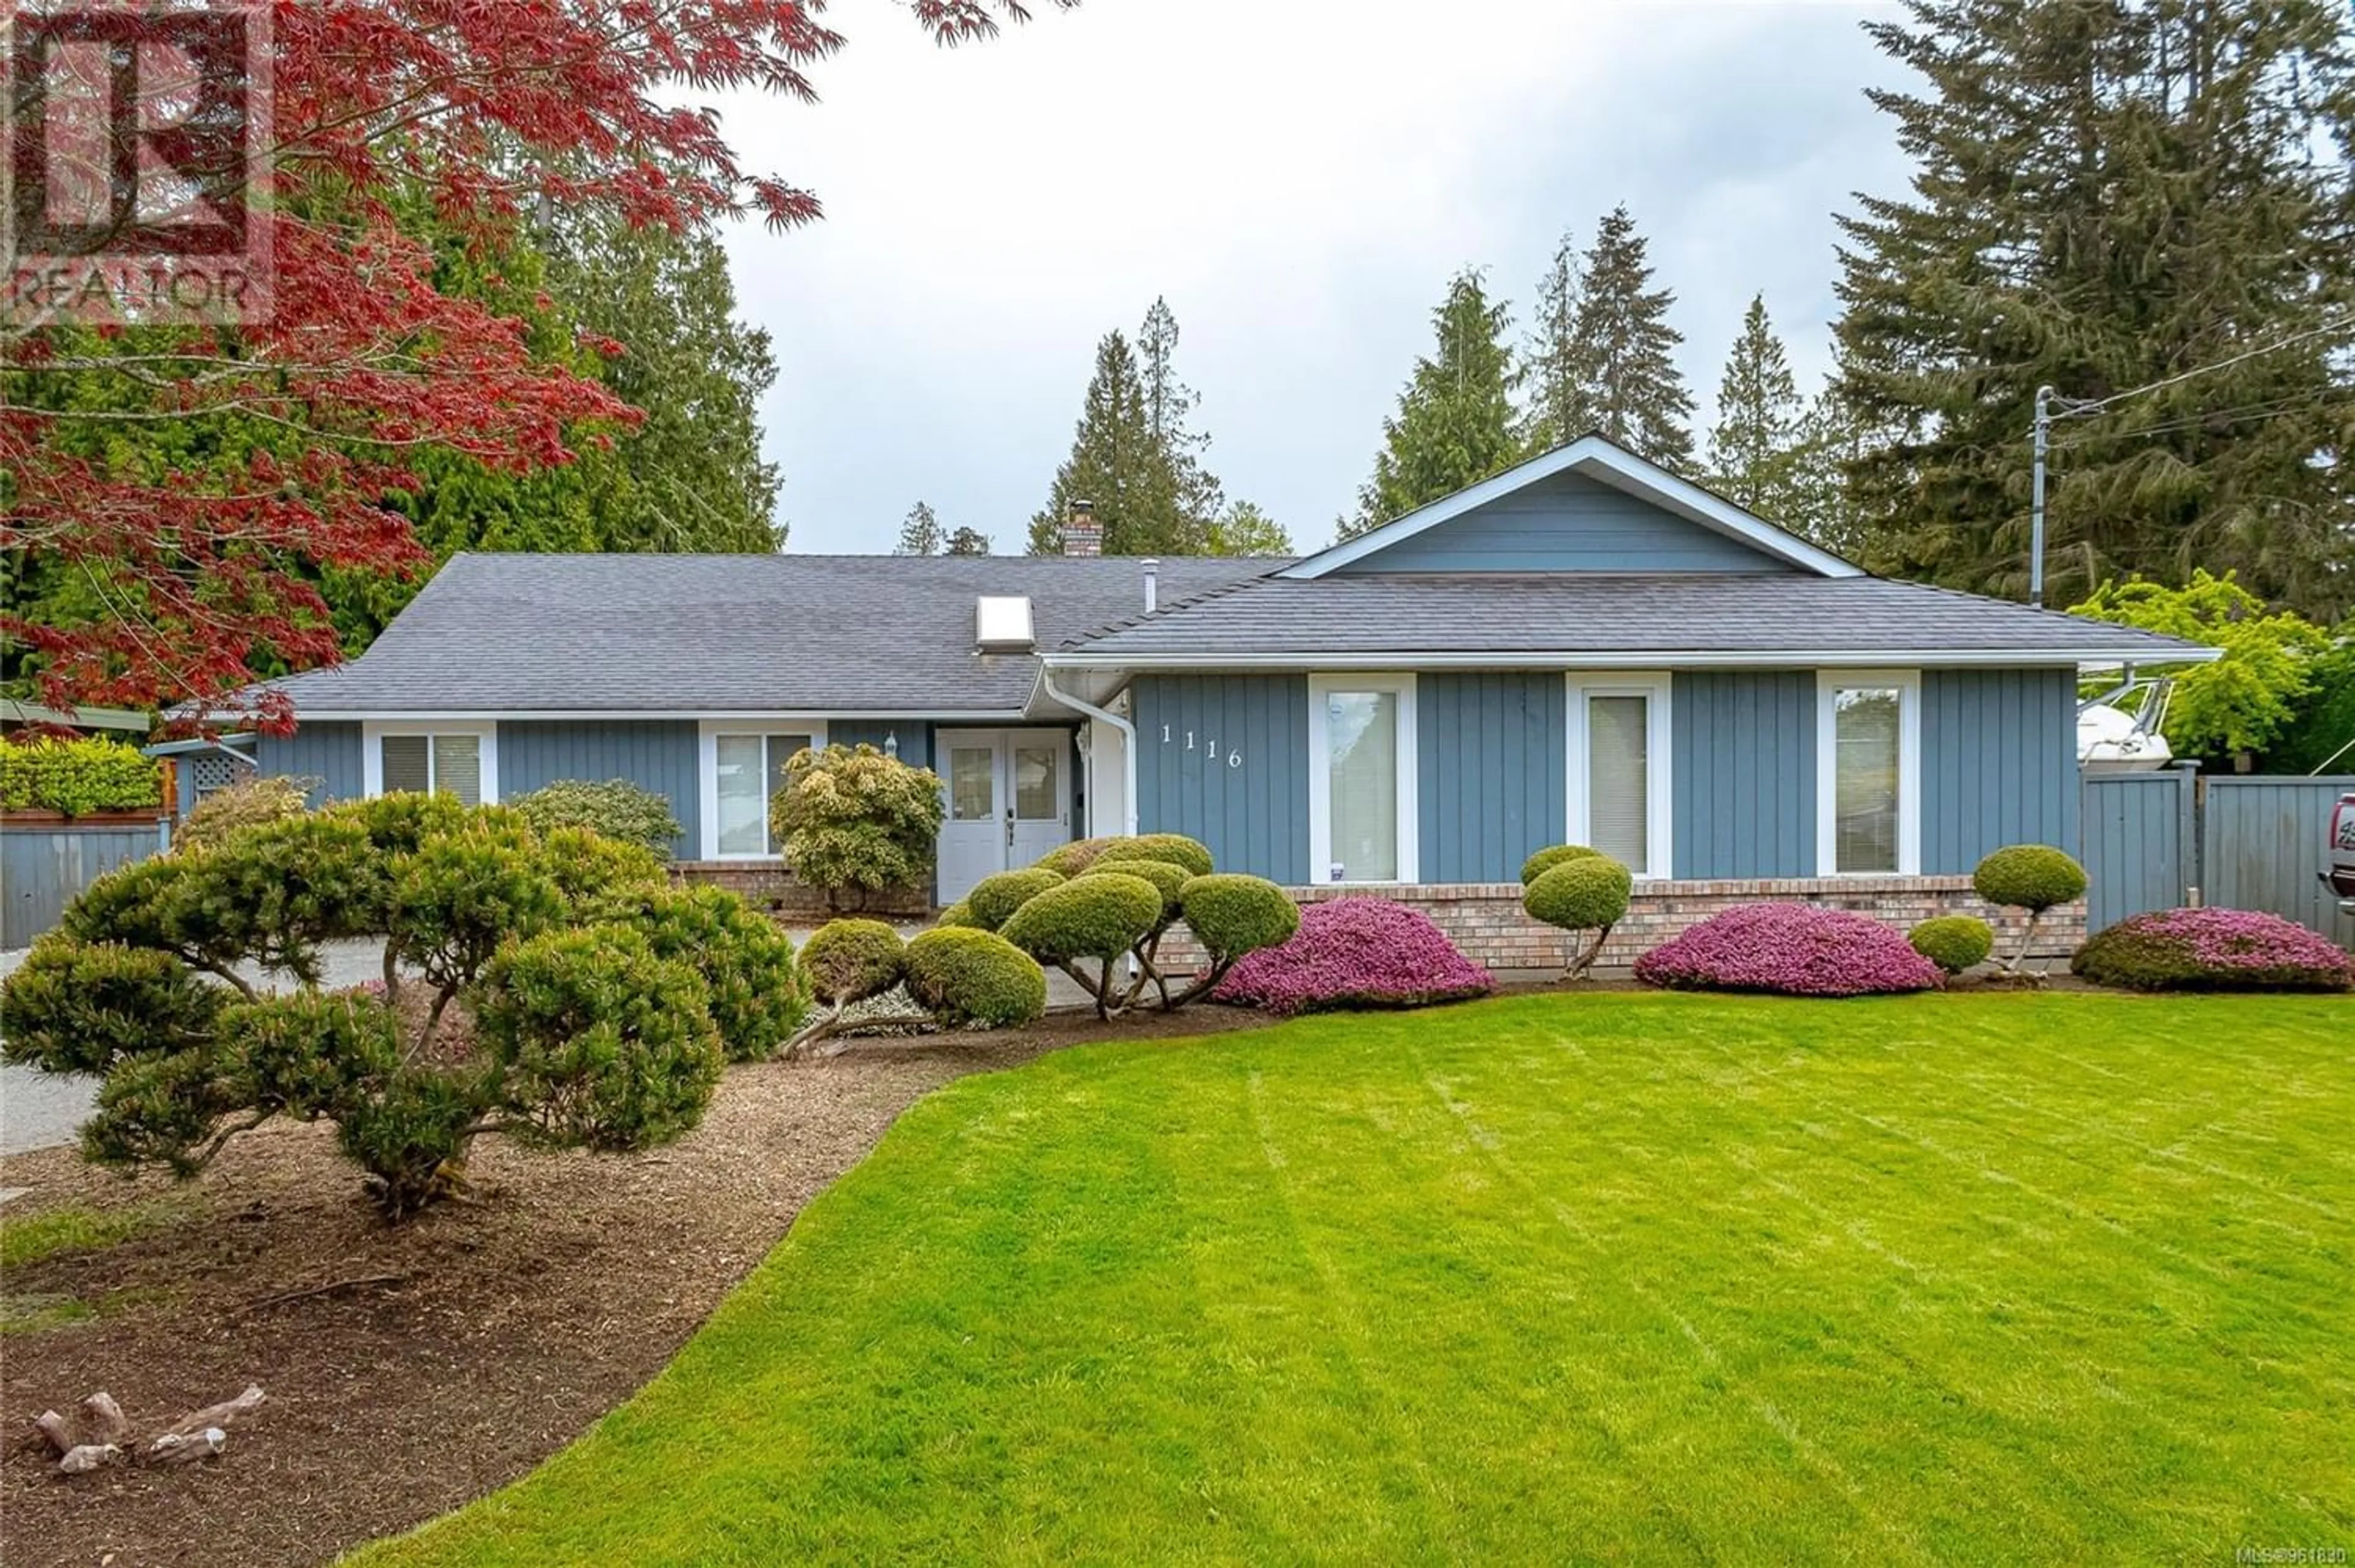 Home with vinyl exterior material for 1116 Pintail Dr, Qualicum Beach British Columbia V9K1C8